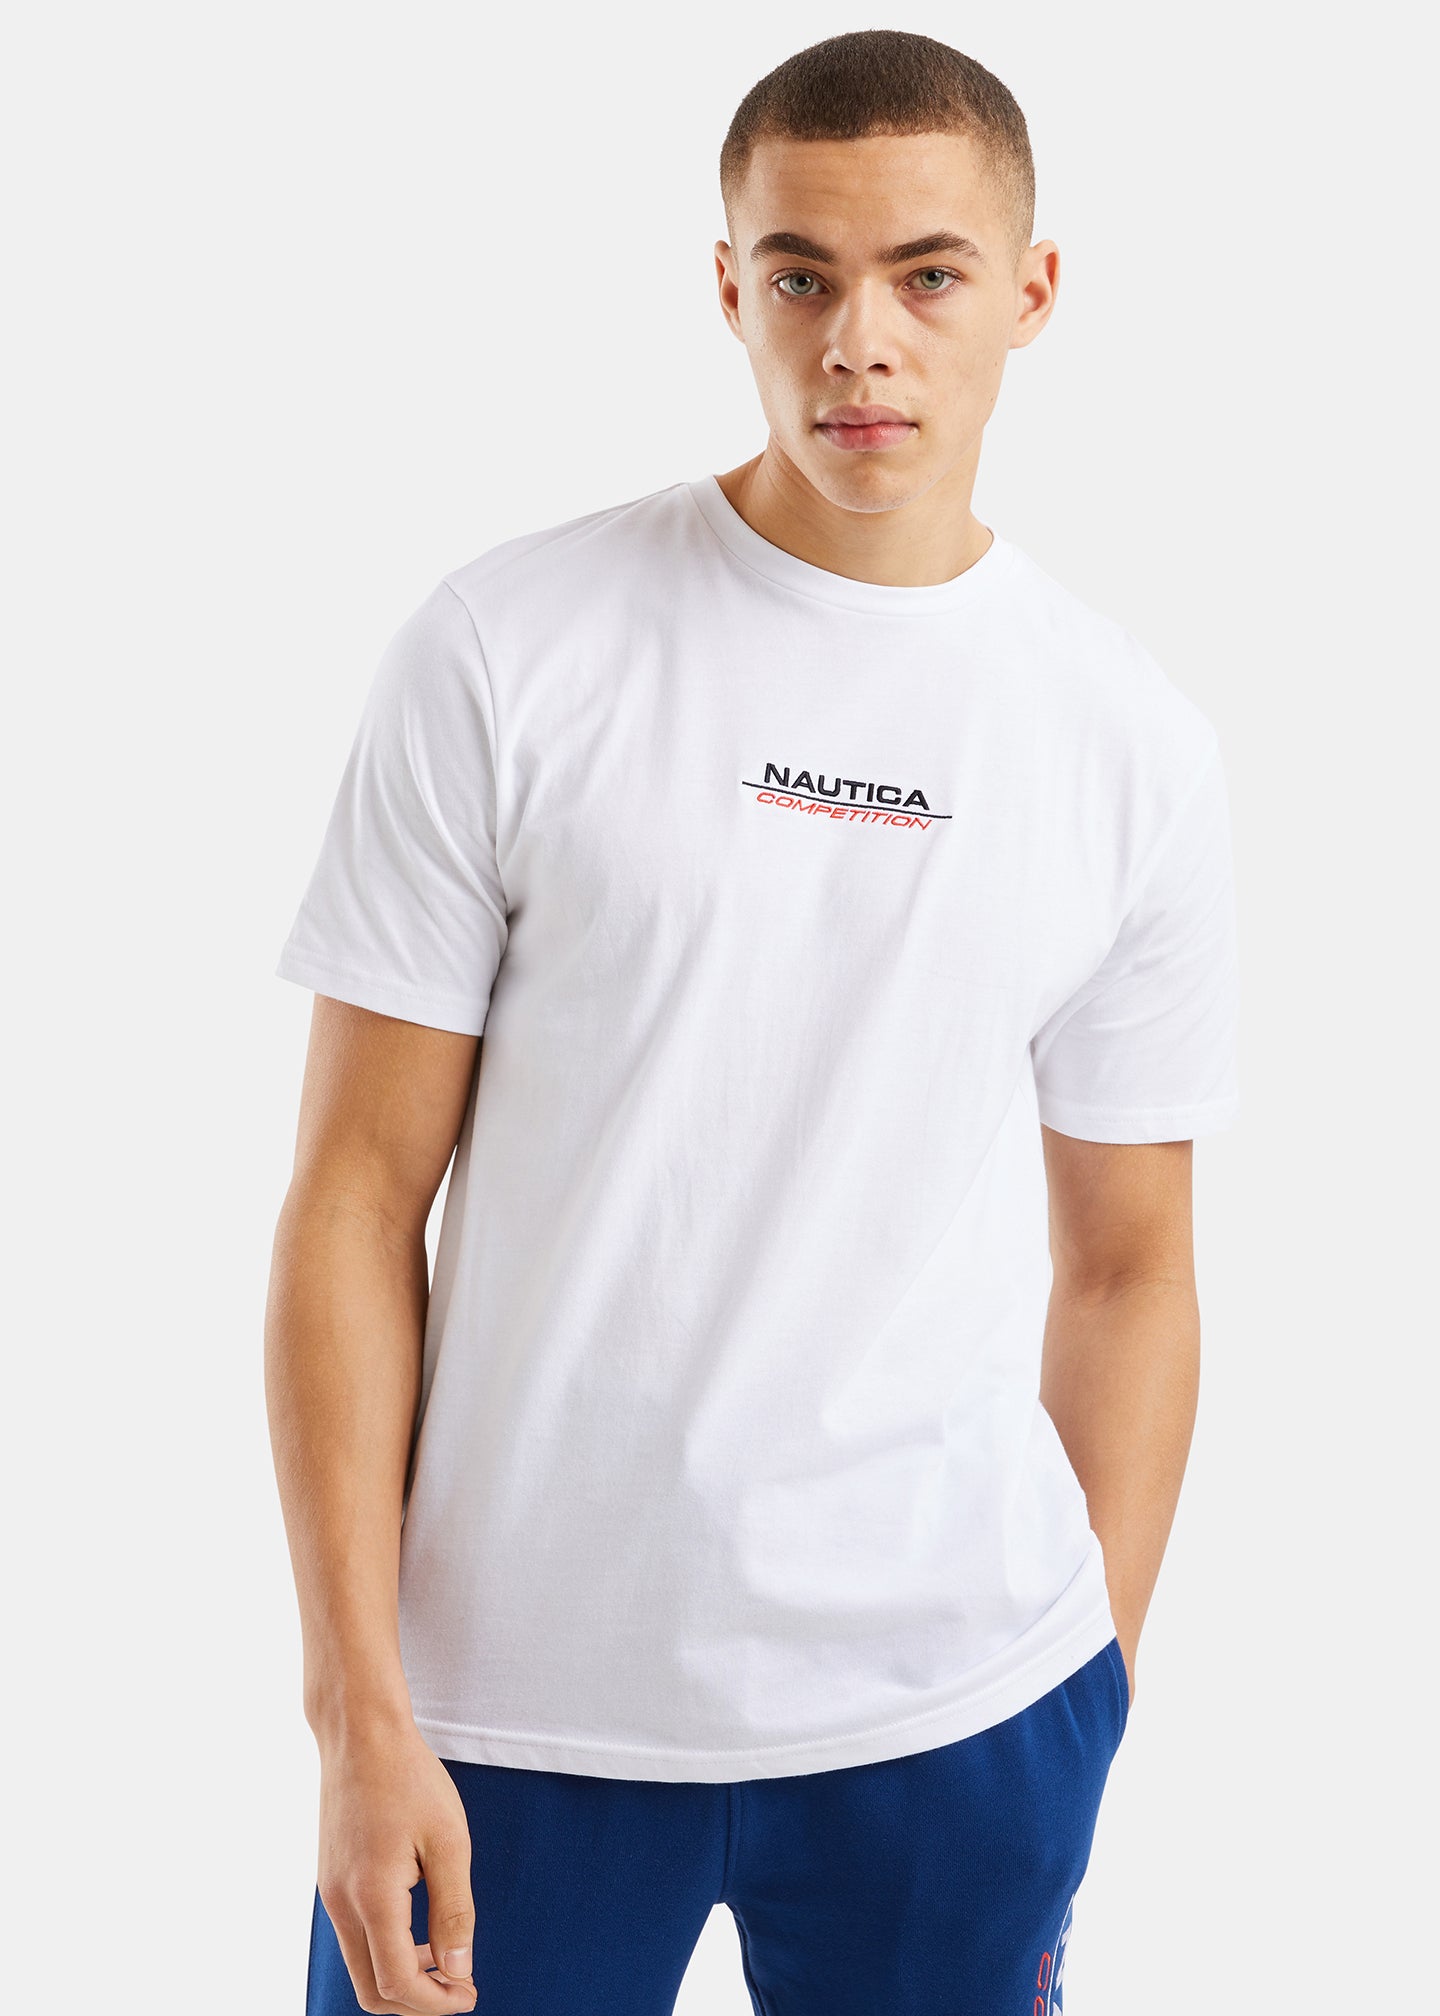 Nautica Competition Mens T Shirts & Tees